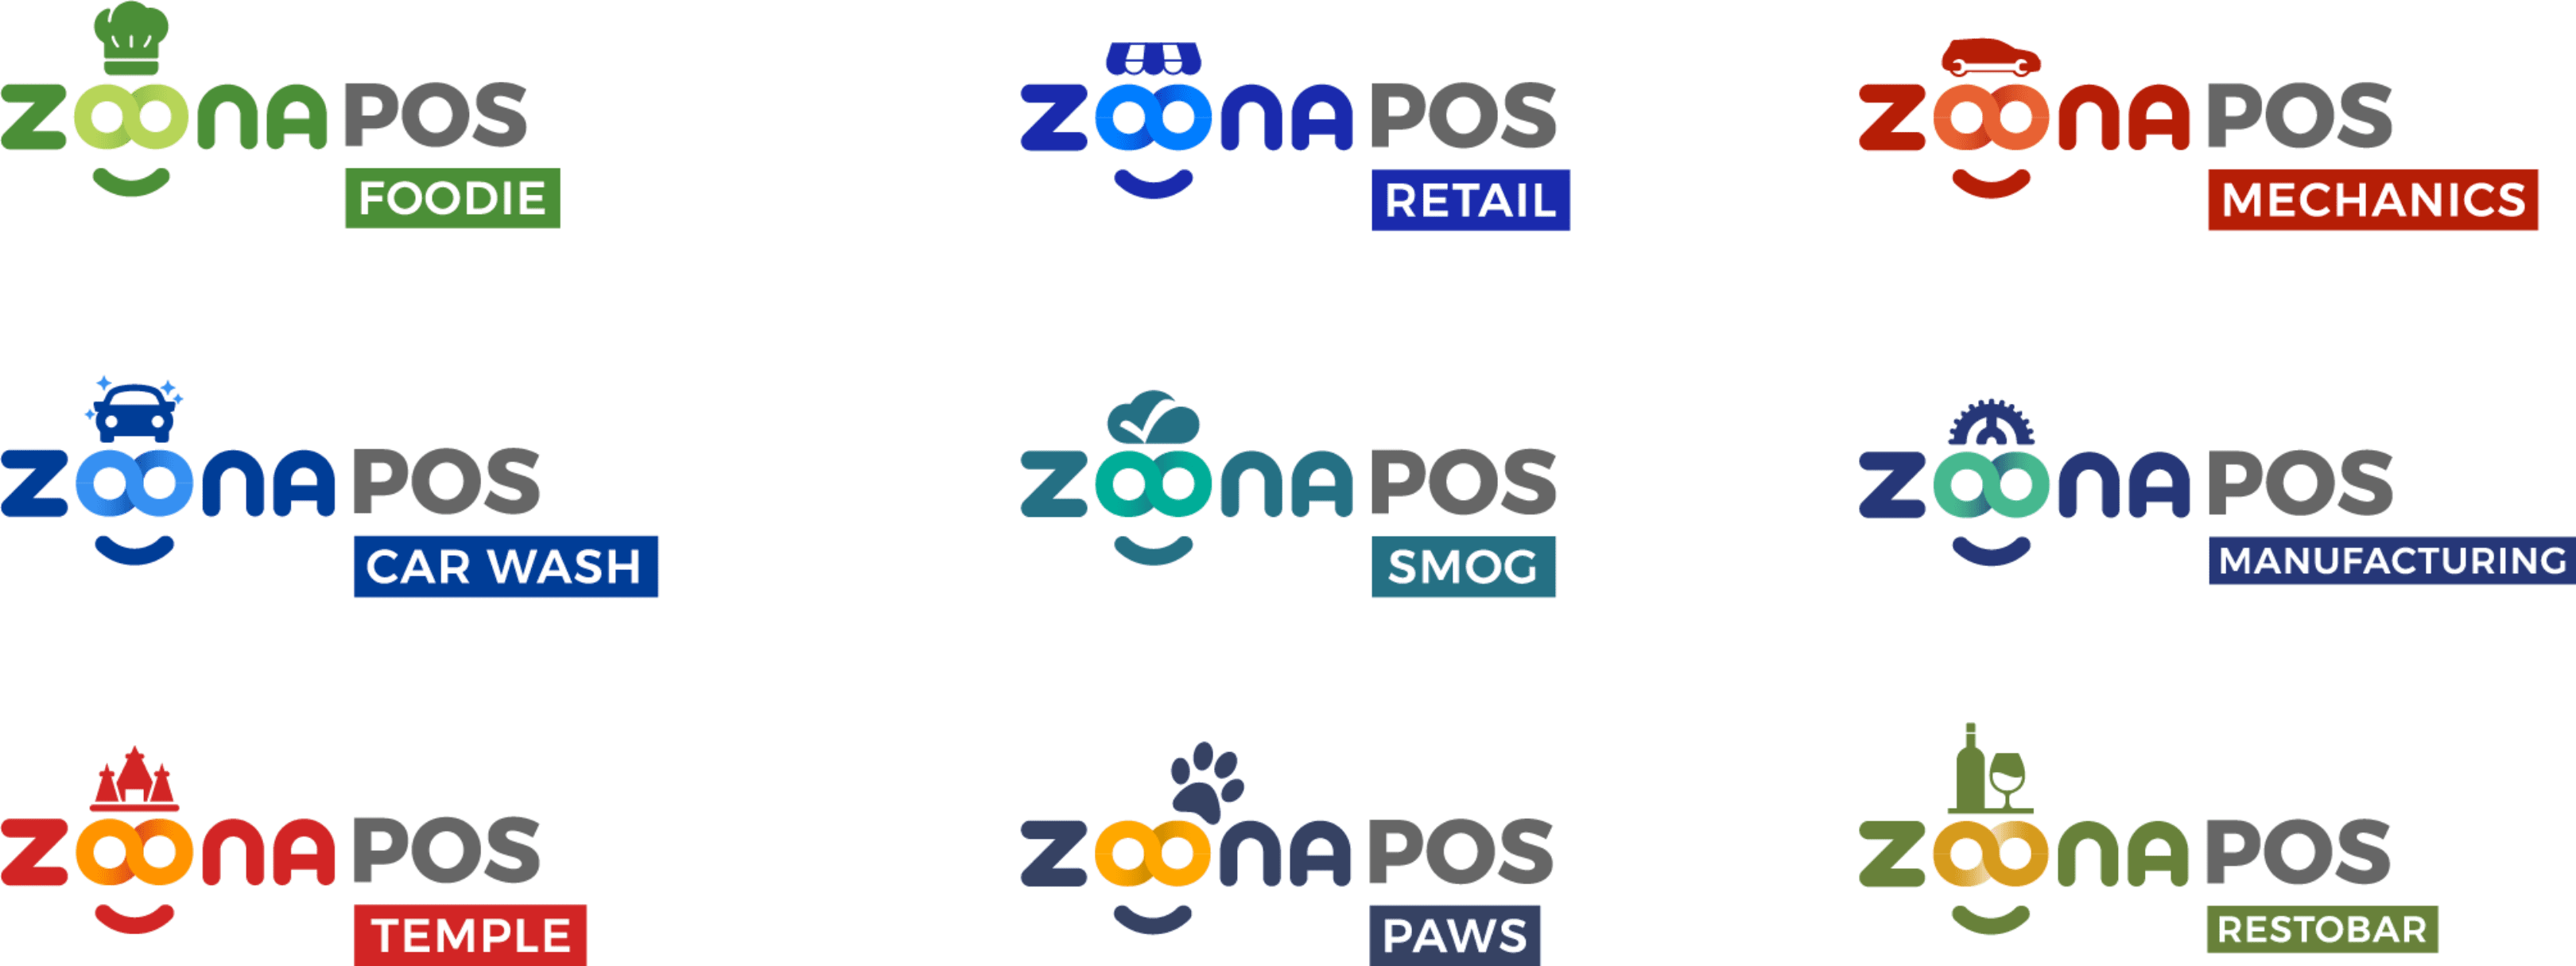 zoonaPos